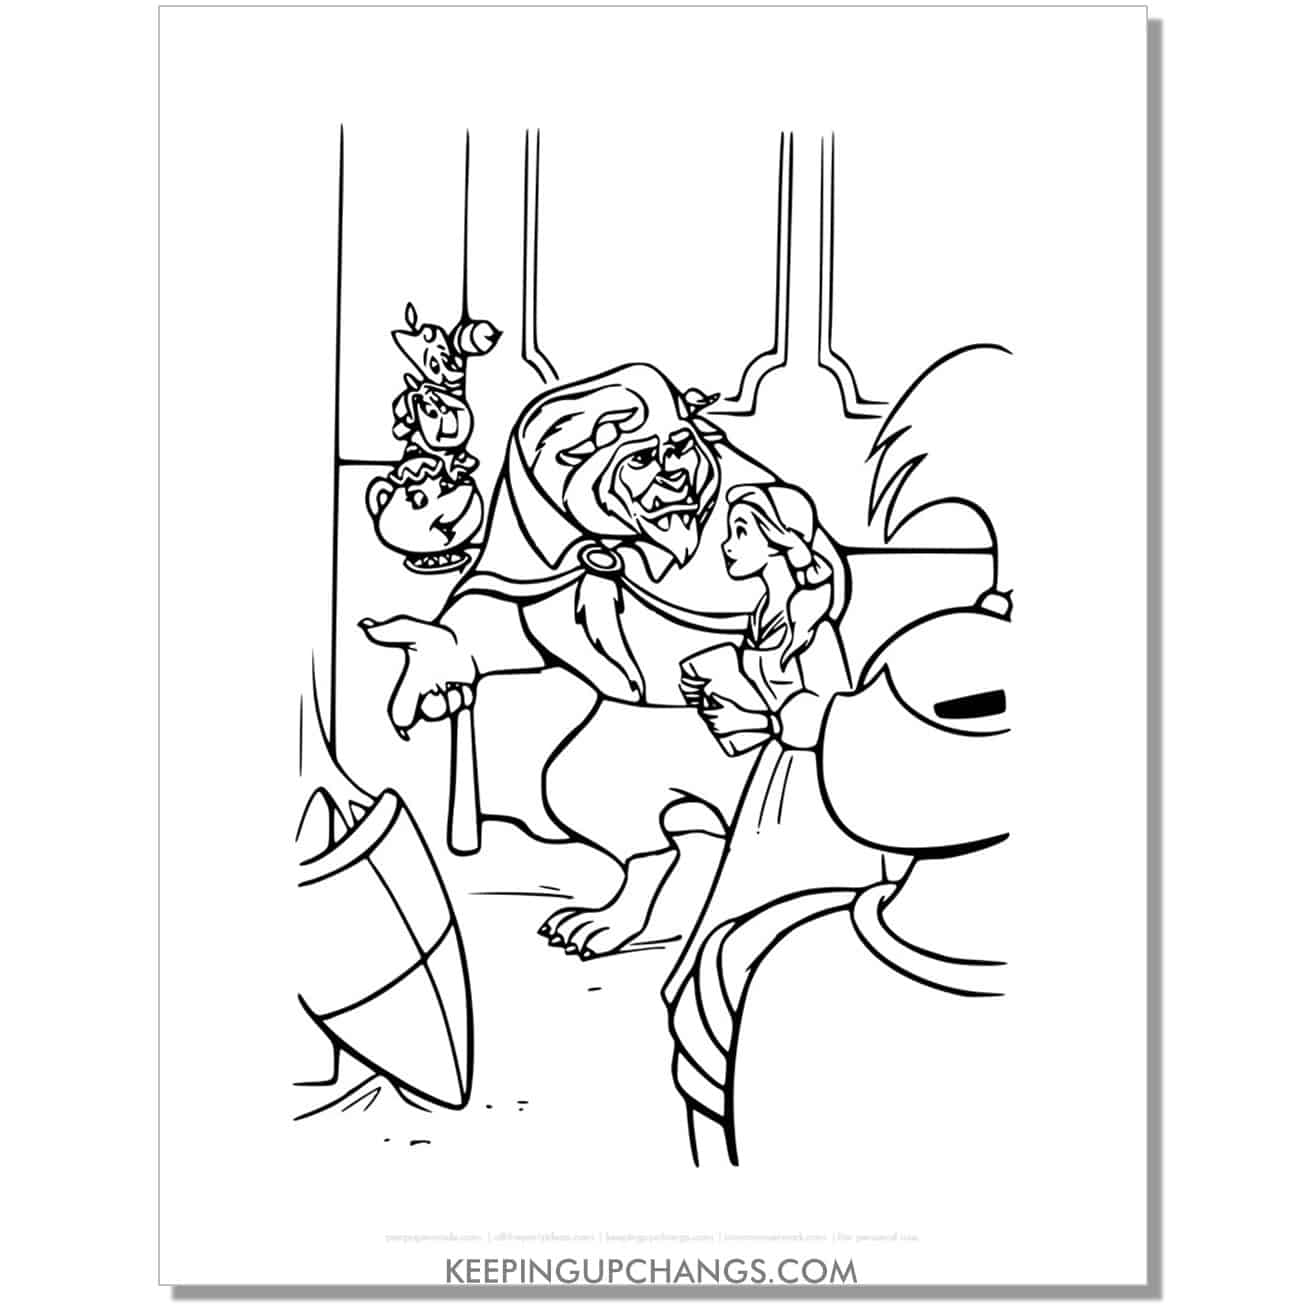 beauty and beast, lumiere, cogsworth, potts coloring page, sheet.